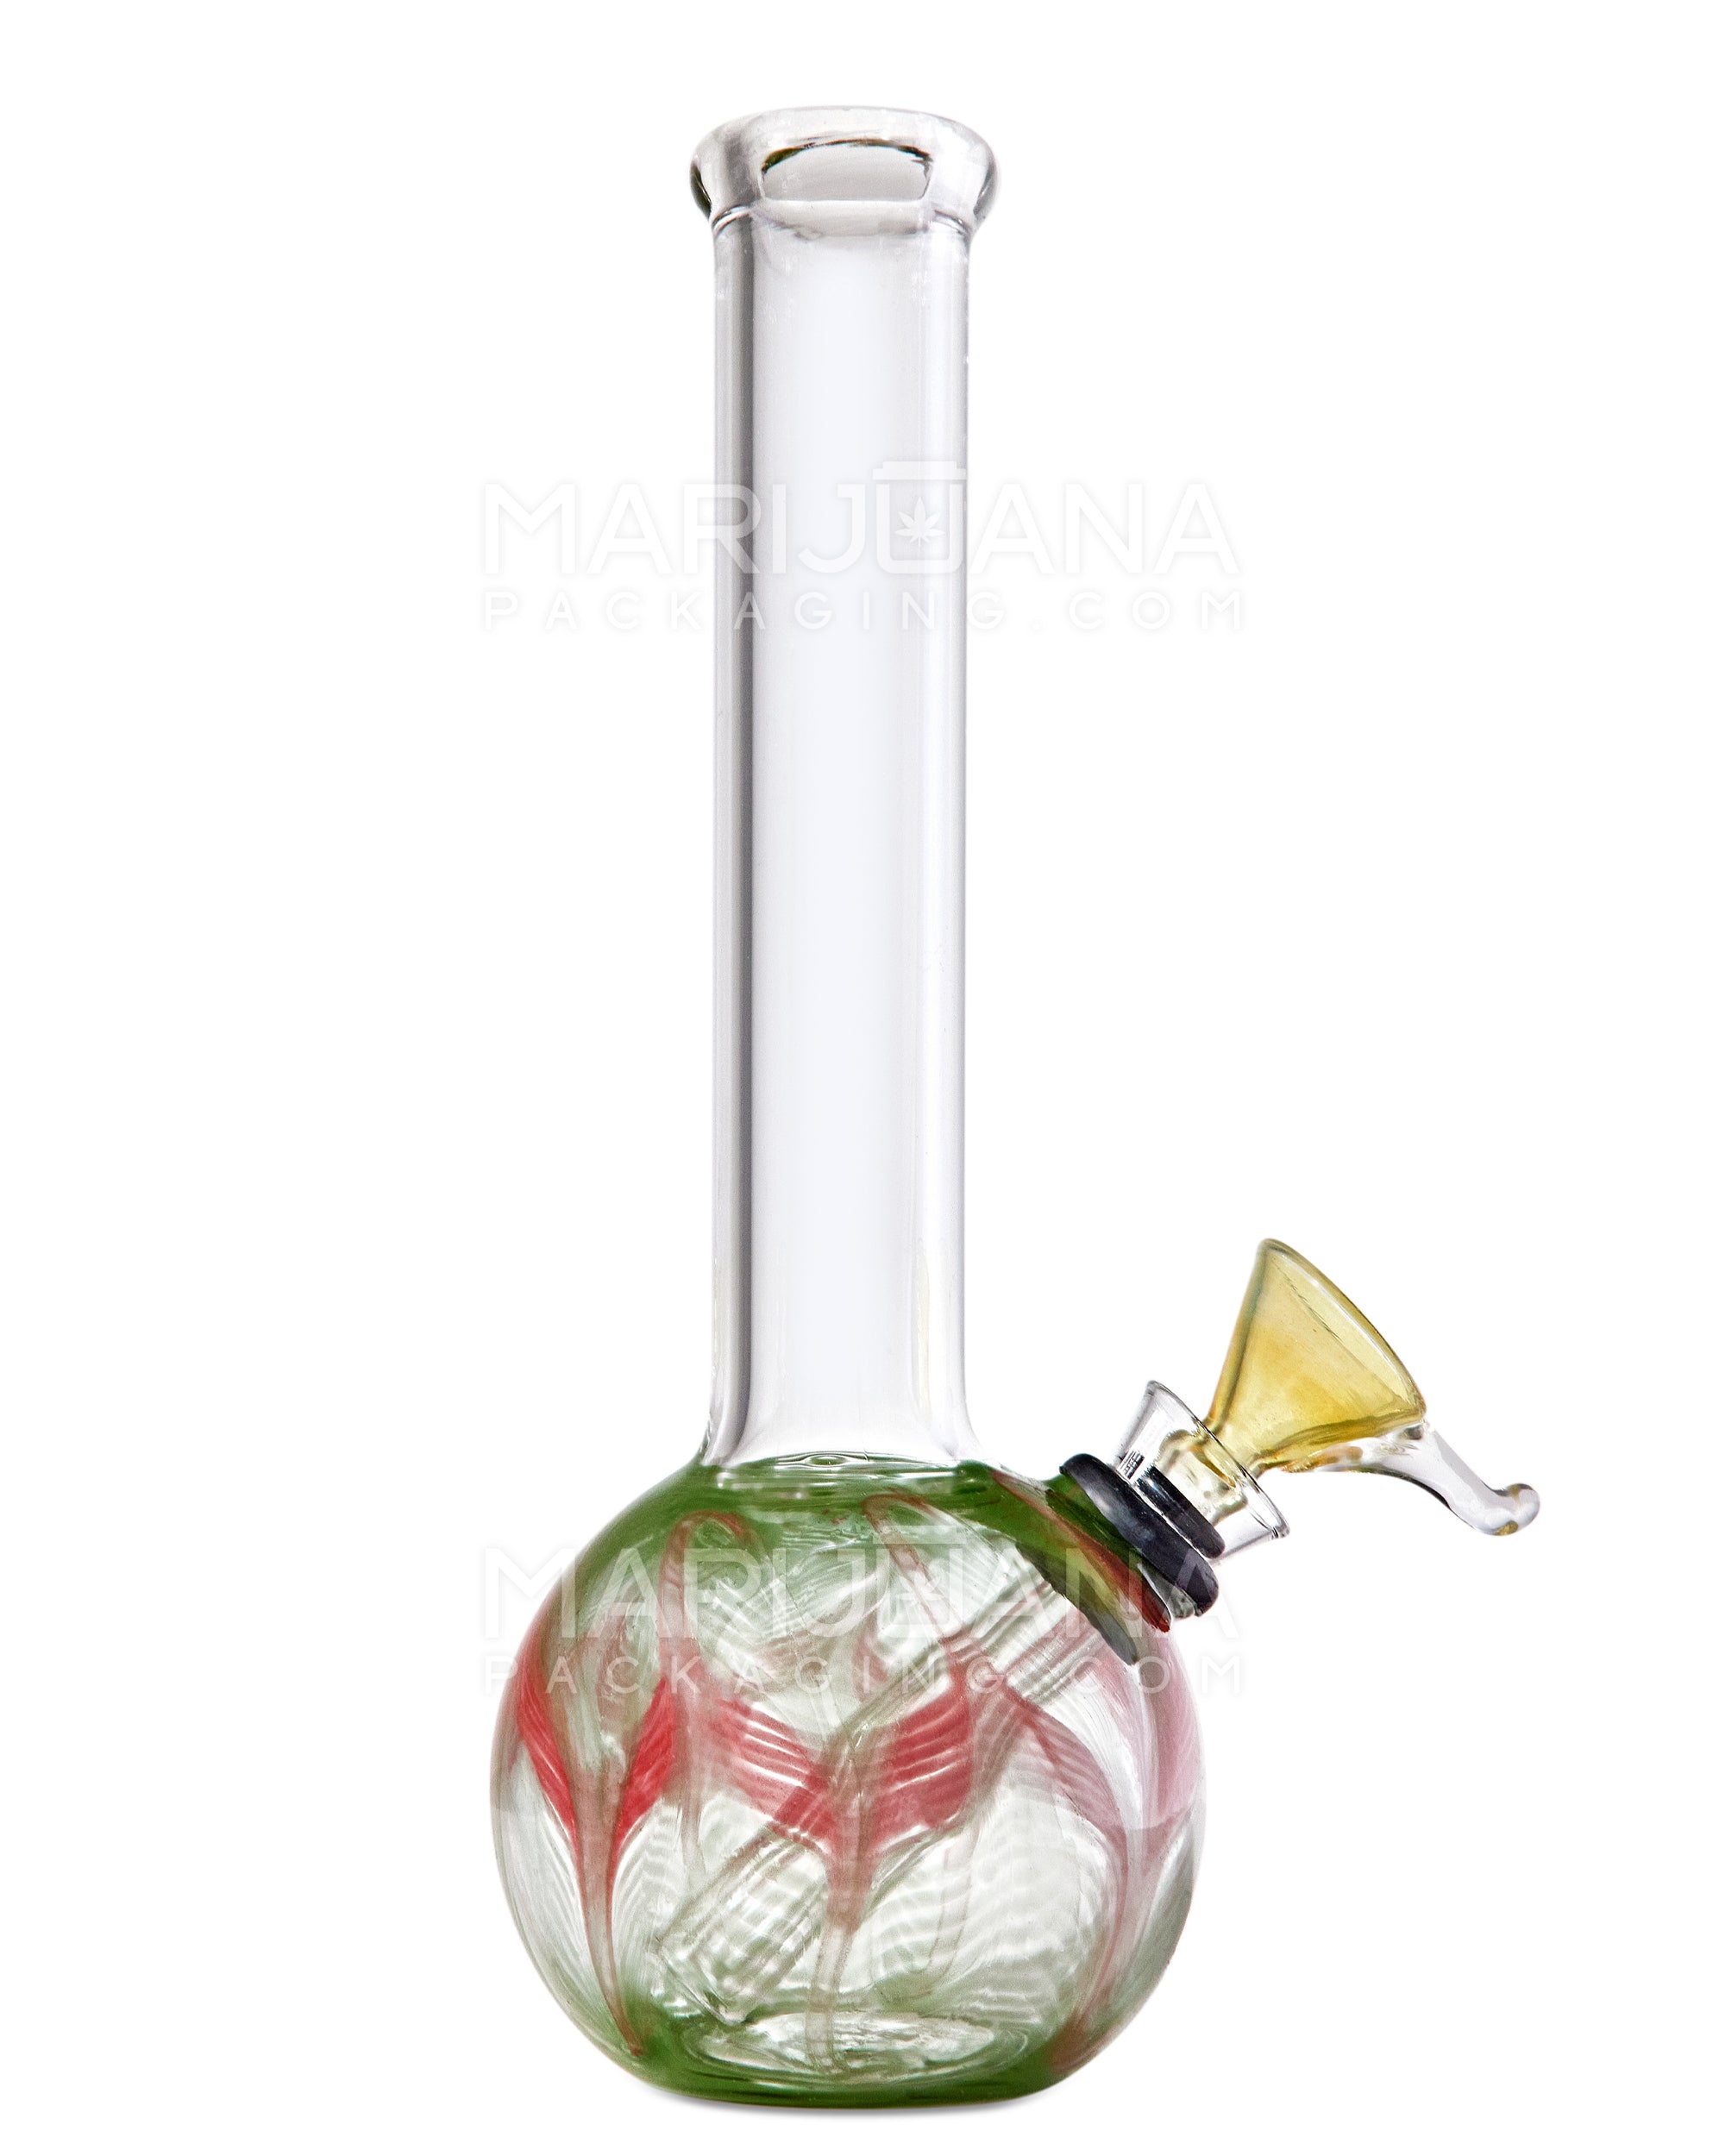 How to Clean A Glass Bong Guide￼ - KingPalm